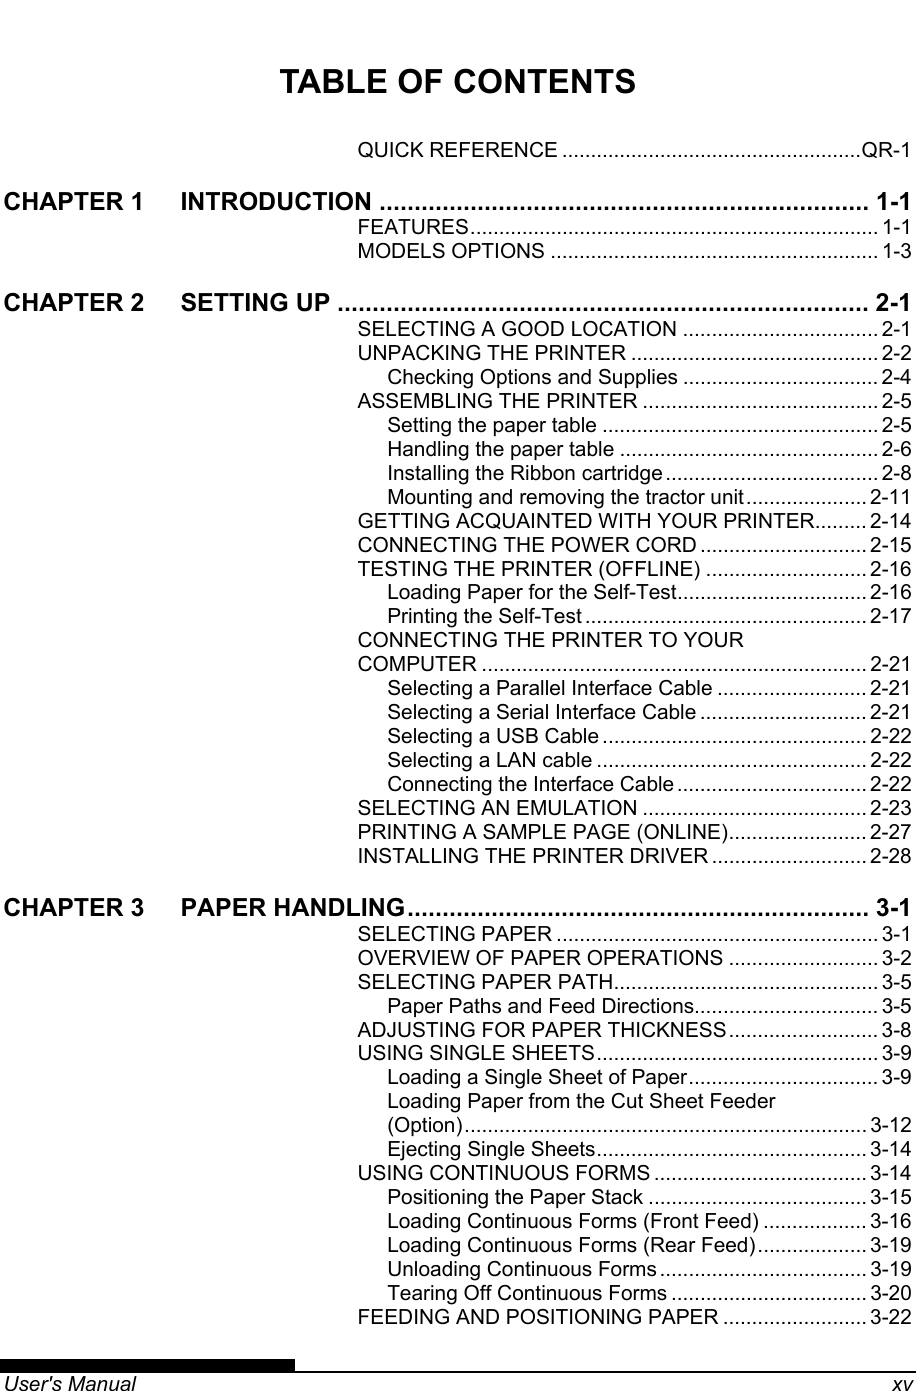   User&apos;s Manual    xv TABLE OF CONTENTS QUICK REFERENCE ....................................................QR-1 CHAPTER 1 INTRODUCTION ...................................................................... 1-1 FEATURES....................................................................... 1-1 MODELS OPTIONS ......................................................... 1-3 CHAPTER 2 SETTING UP ............................................................................ 2-1 SELECTING A GOOD LOCATION .................................. 2-1 UNPACKING THE PRINTER ........................................... 2-2 Checking Options and Supplies .................................. 2-4 ASSEMBLING THE PRINTER ......................................... 2-5 Setting the paper table ................................................ 2-5 Handling the paper table ............................................. 2-6 Installing the Ribbon cartridge ..................................... 2-8 Mounting and removing the tractor unit..................... 2-11 GETTING ACQUAINTED WITH YOUR PRINTER......... 2-14 CONNECTING THE POWER CORD ............................. 2-15 TESTING THE PRINTER (OFFLINE) ............................ 2-16 Loading Paper for the Self-Test................................. 2-16 Printing the Self-Test ................................................. 2-17 CONNECTING THE PRINTER TO YOUR COMPUTER ................................................................... 2-21 Selecting a Parallel Interface Cable .......................... 2-21 Selecting a Serial Interface Cable ............................. 2-21 Selecting a USB Cable .............................................. 2-22 Selecting a LAN cable ............................................... 2-22 Connecting the Interface Cable ................................. 2-22 SELECTING AN EMULATION ....................................... 2-23 PRINTING A SAMPLE PAGE (ONLINE)........................ 2-27 INSTALLING THE PRINTER DRIVER ........................... 2-28 CHAPTER 3 PAPER HANDLING.................................................................. 3-1 SELECTING PAPER ........................................................ 3-1 OVERVIEW OF PAPER OPERATIONS .......................... 3-2 SELECTING PAPER PATH.............................................. 3-5 Paper Paths and Feed Directions................................ 3-5 ADJUSTING FOR PAPER THICKNESS.......................... 3-8 USING SINGLE SHEETS................................................. 3-9 Loading a Single Sheet of Paper................................. 3-9 Loading Paper from the Cut Sheet Feeder (Option)...................................................................... 3-12 Ejecting Single Sheets............................................... 3-14 USING CONTINUOUS FORMS ..................................... 3-14 Positioning the Paper Stack ...................................... 3-15 Loading Continuous Forms (Front Feed) .................. 3-16 Loading Continuous Forms (Rear Feed)................... 3-19 Unloading Continuous Forms .................................... 3-19 Tearing Off Continuous Forms .................................. 3-20 FEEDING AND POSITIONING PAPER ......................... 3-22 